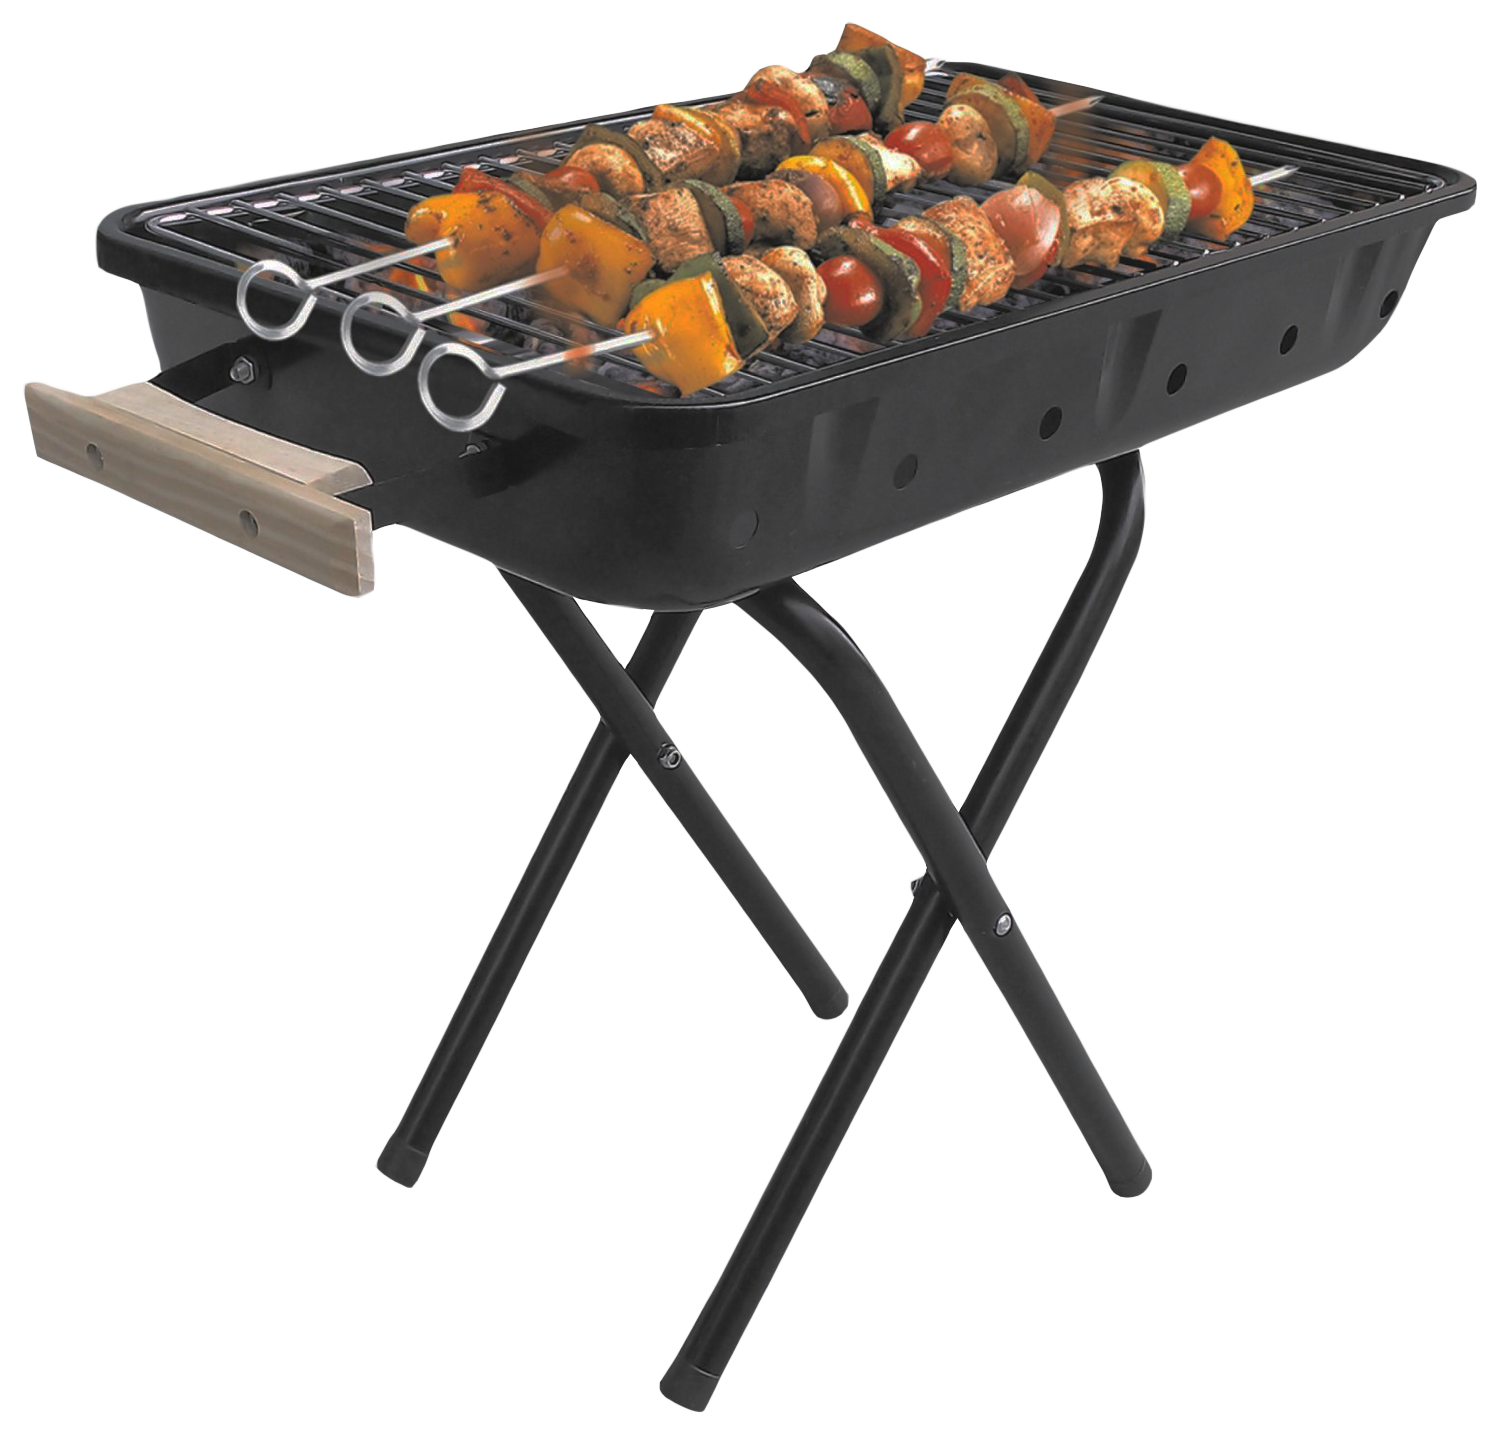 Chilli Barbecue Download Free Image PNG Image